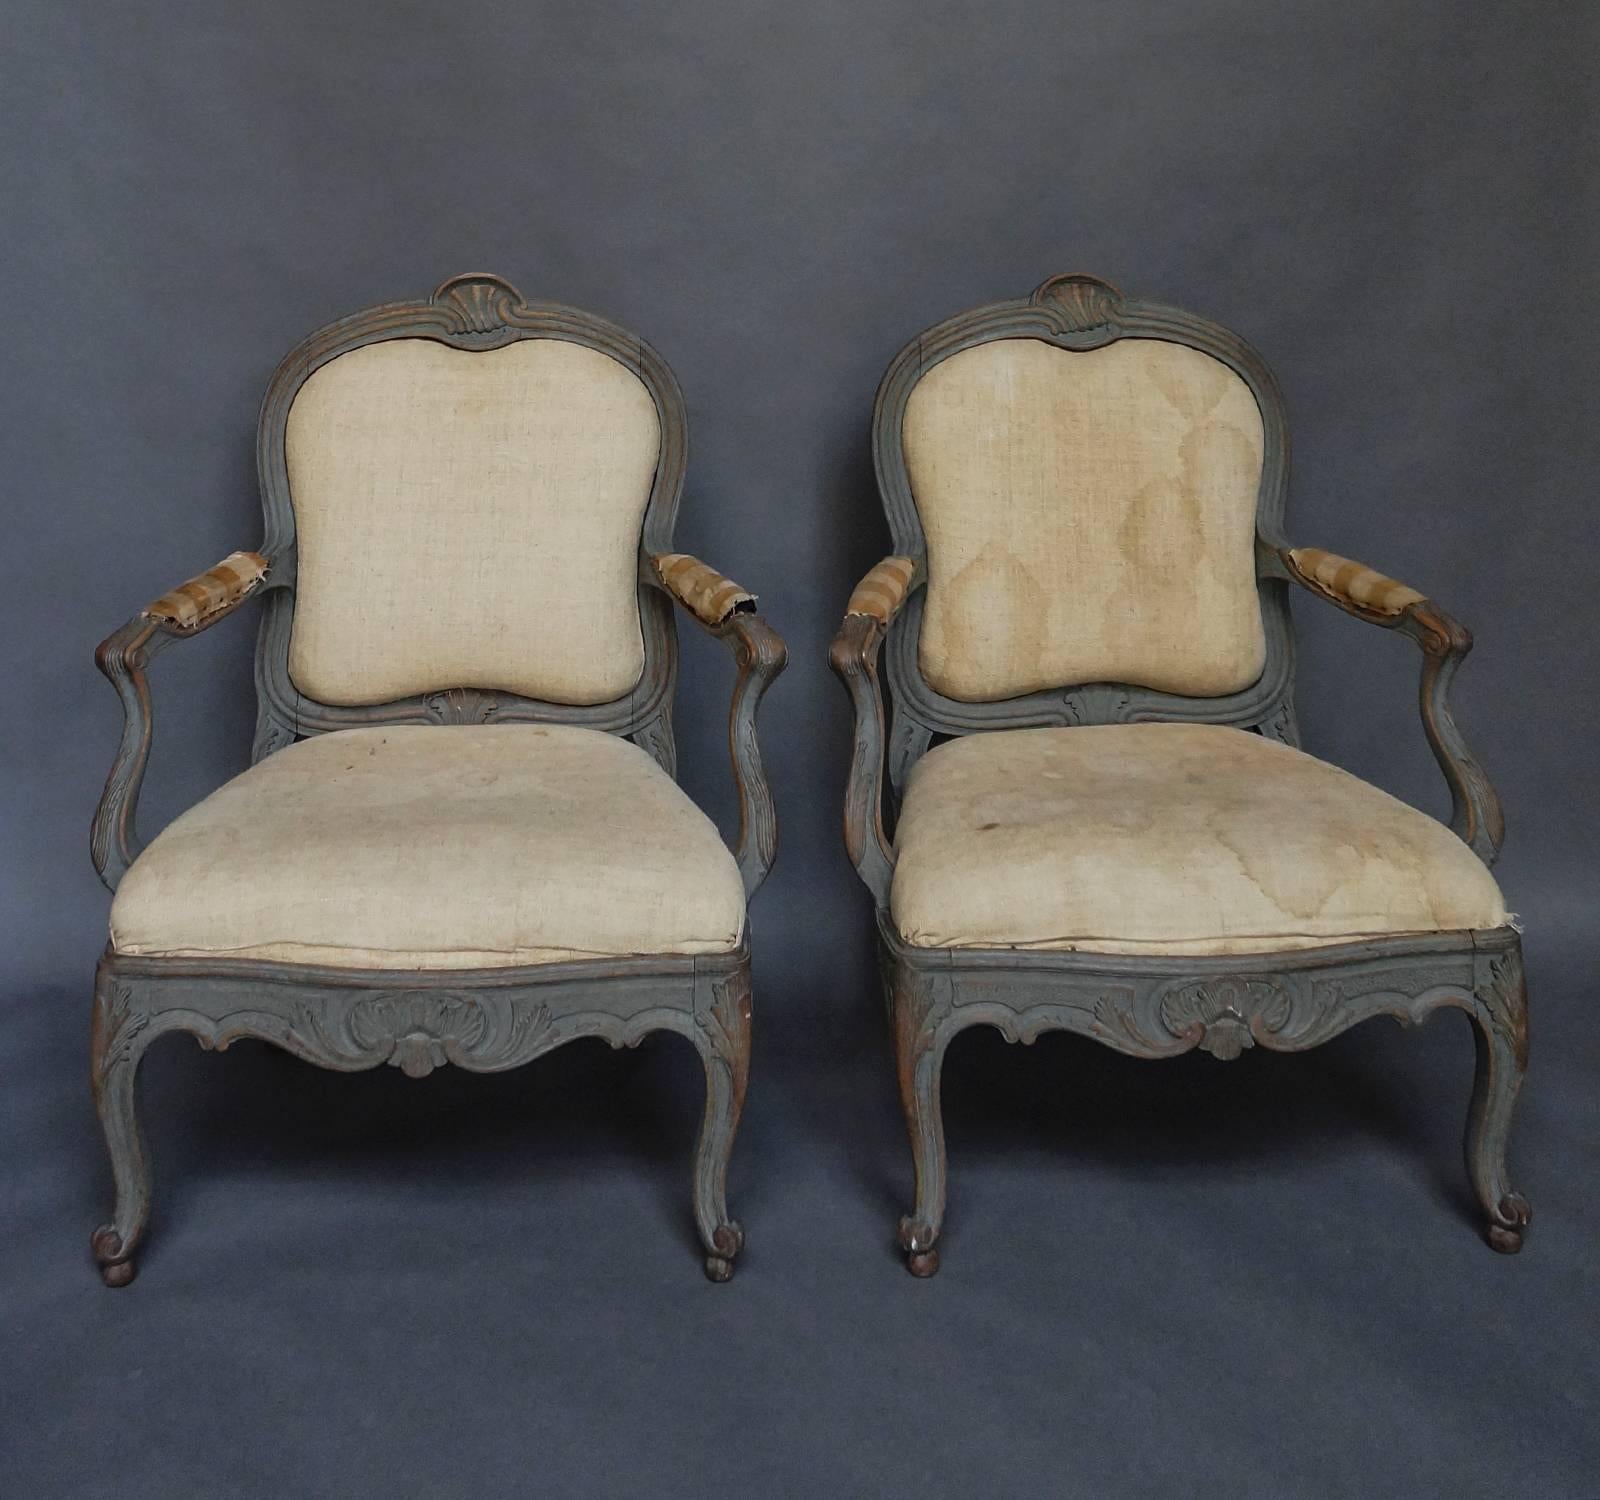 Pair of Swedish armchairs from the home of Countess O.S. Henckel von Donnersmarck. They were made and dated in 1866 after a model from 1760, eventually finding their way to the entailed Biby estate in Södermanland, Sweden. The frames are